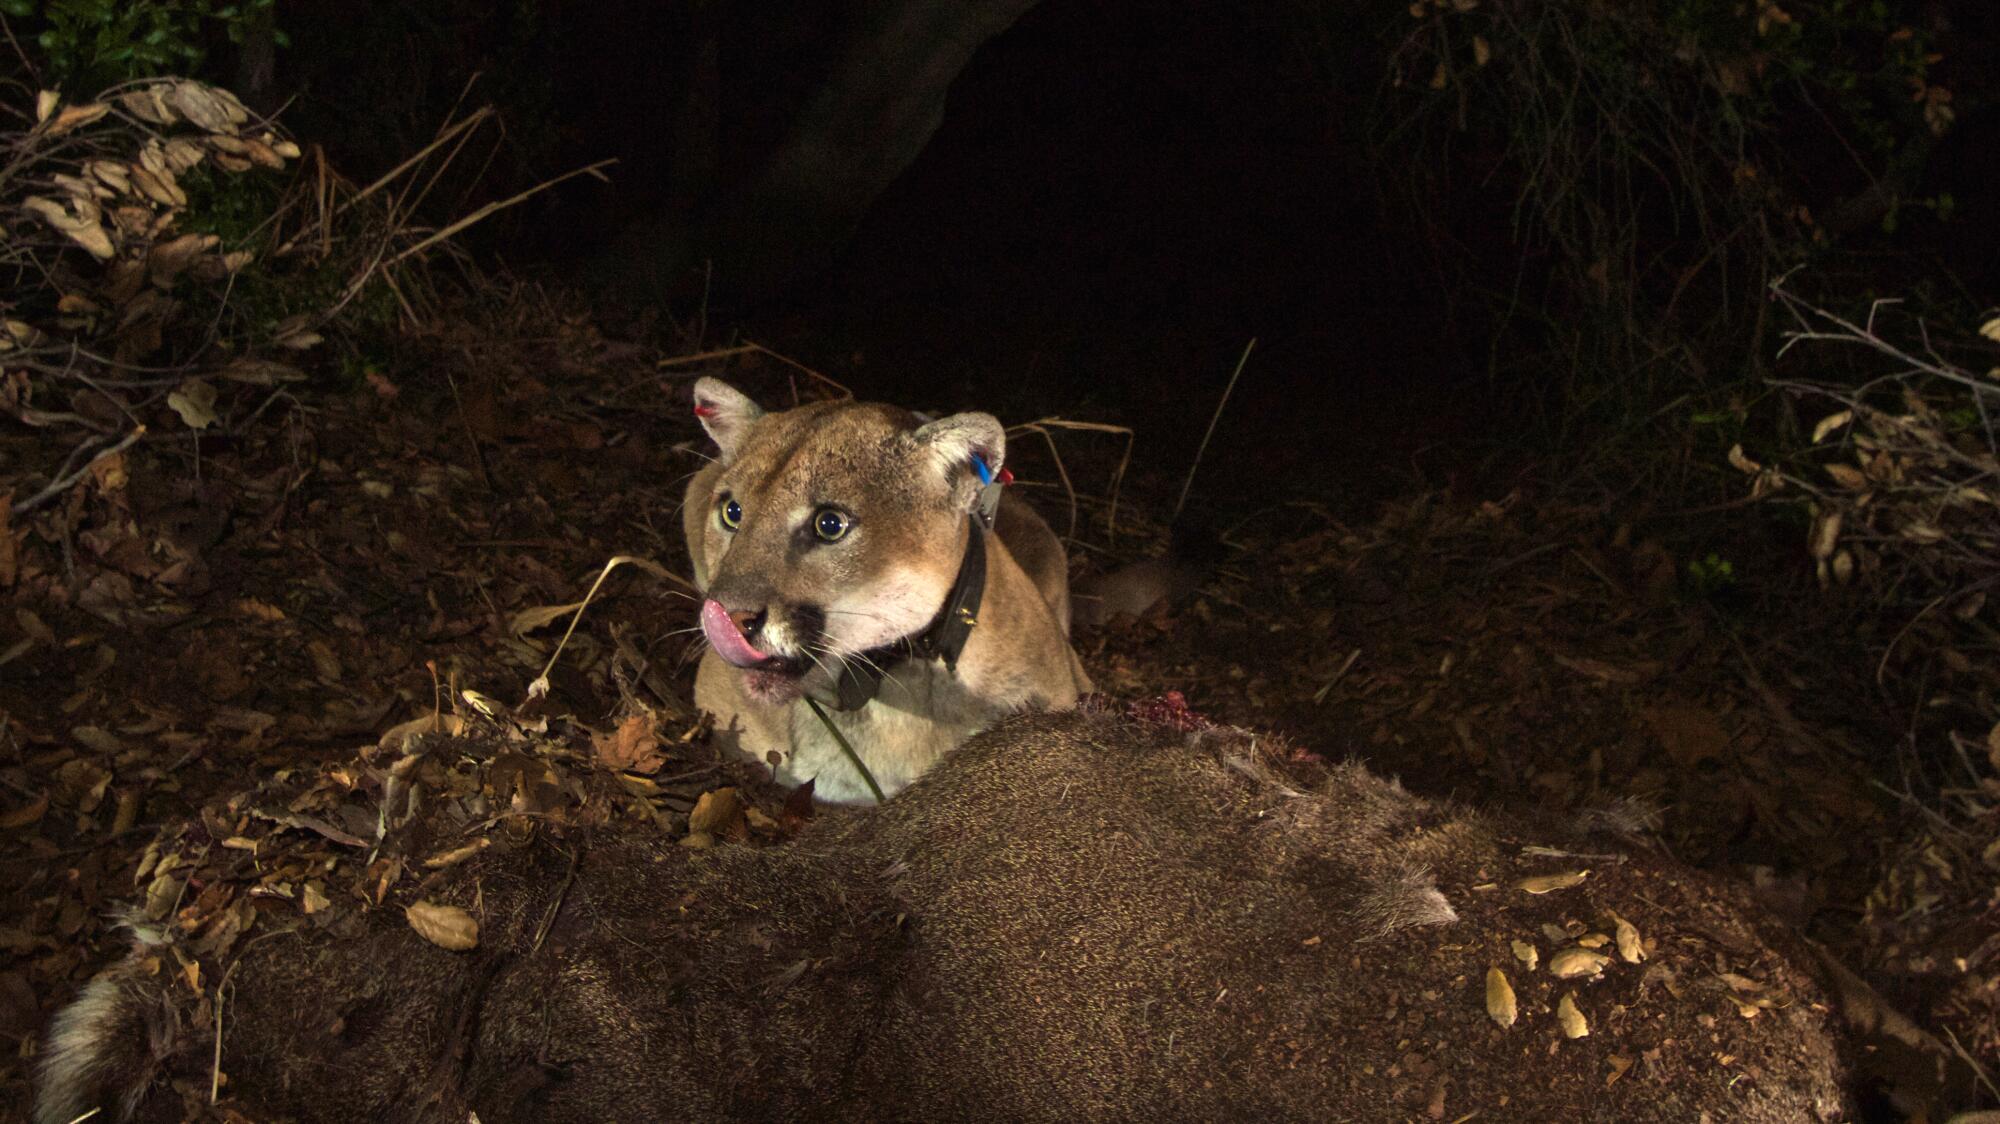 P-22 feeding on the carcass of a mule deer in Griffith Park at night.